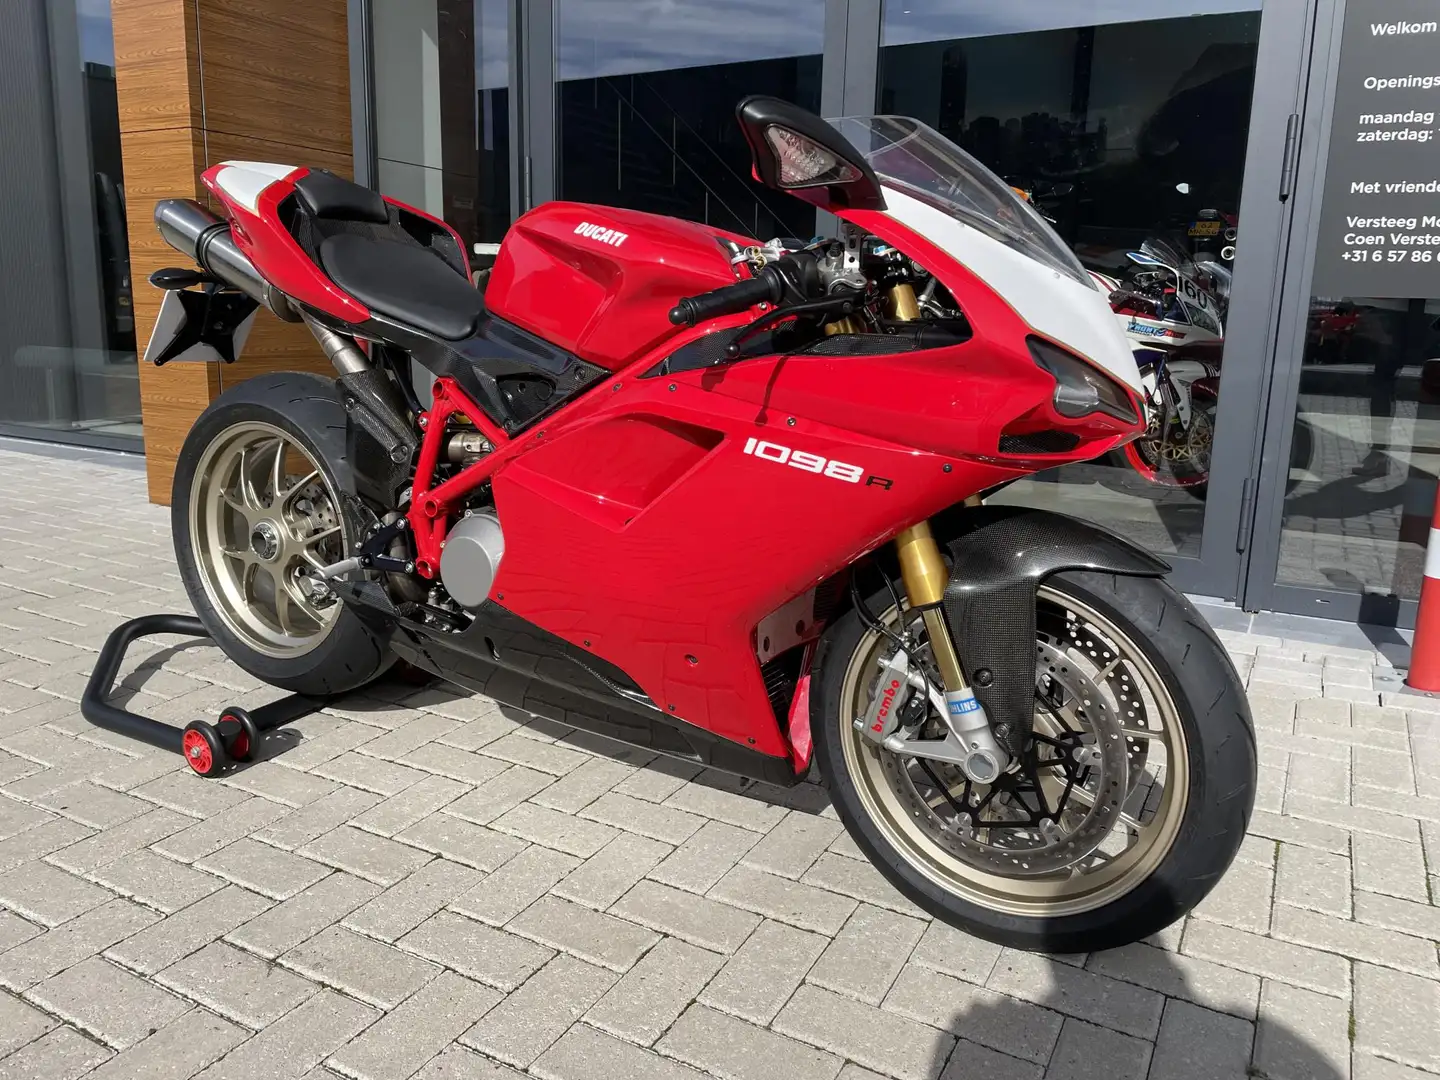 Ducati 1098 R # 1098R # one of a kind Rood - 2